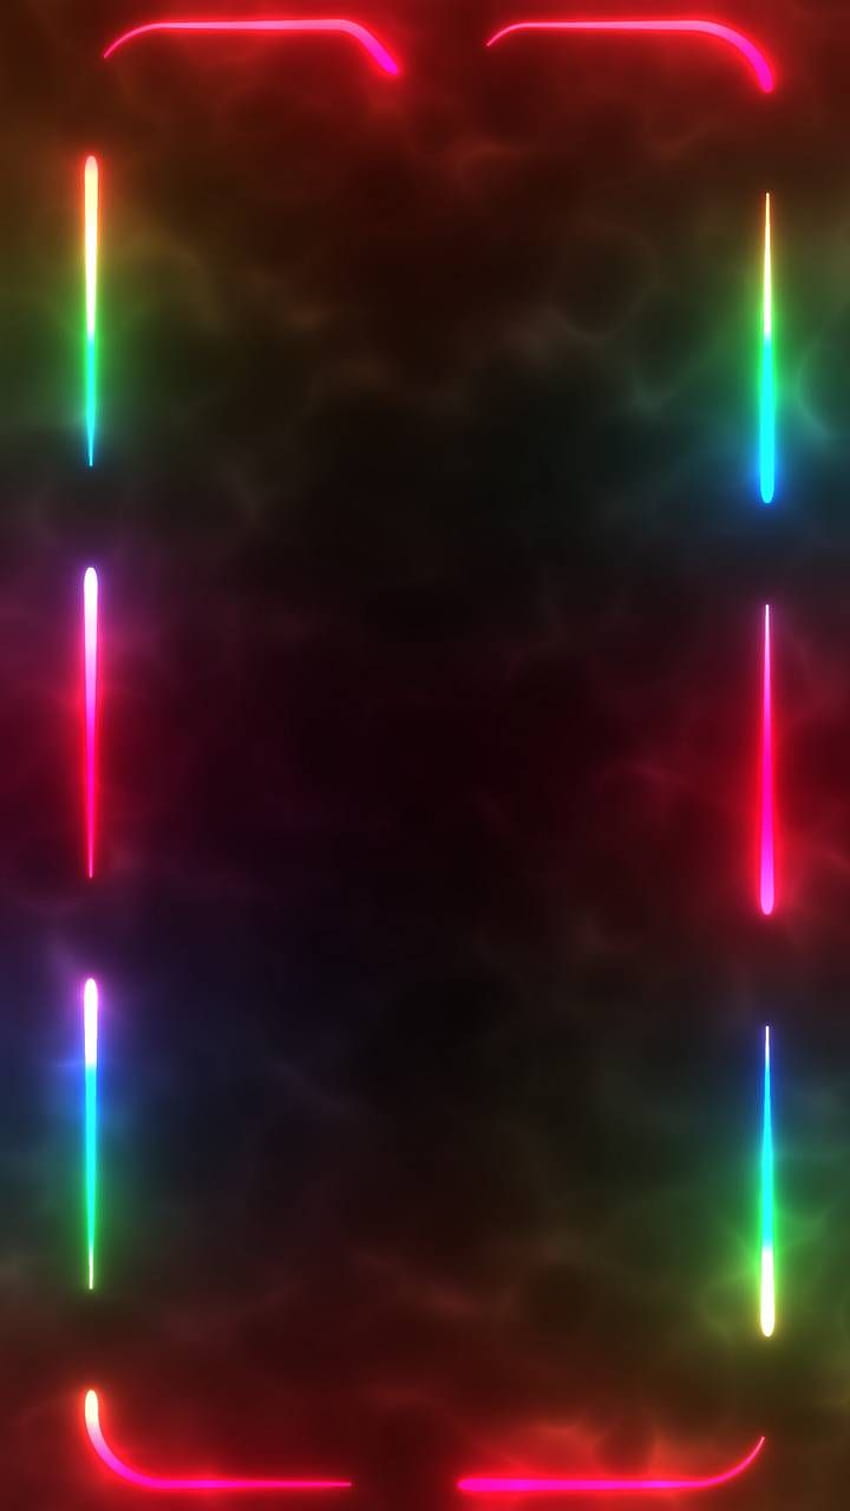 1920x1080px, 1080P Free download | Border Lights 1 by Frame Designs ...